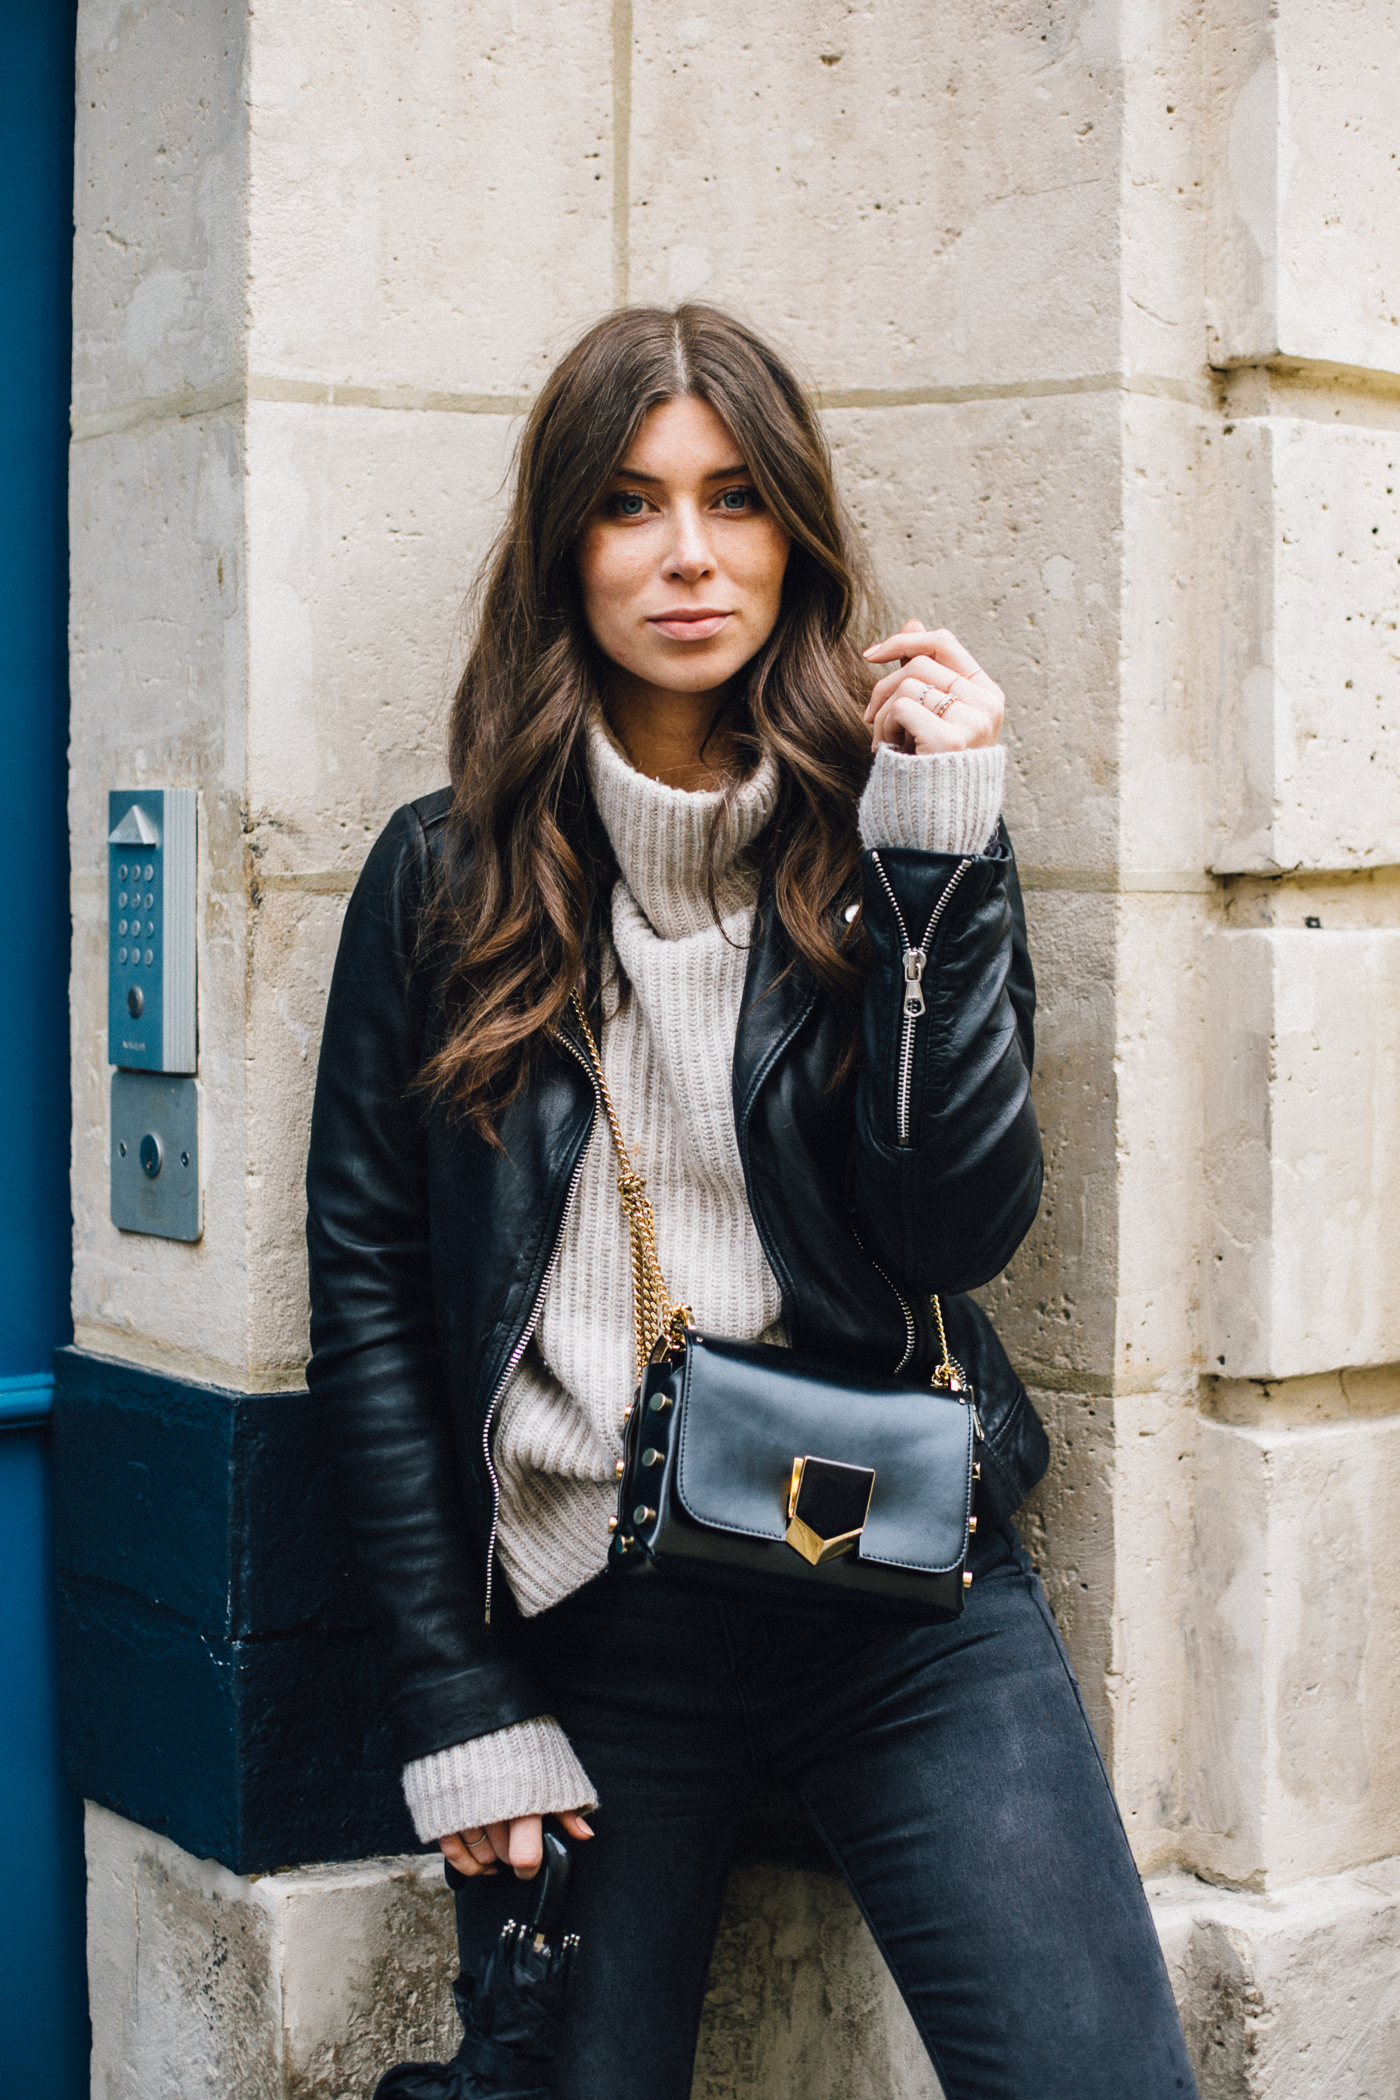 Rainy Days in Paris Outfit | Love Daily Dose